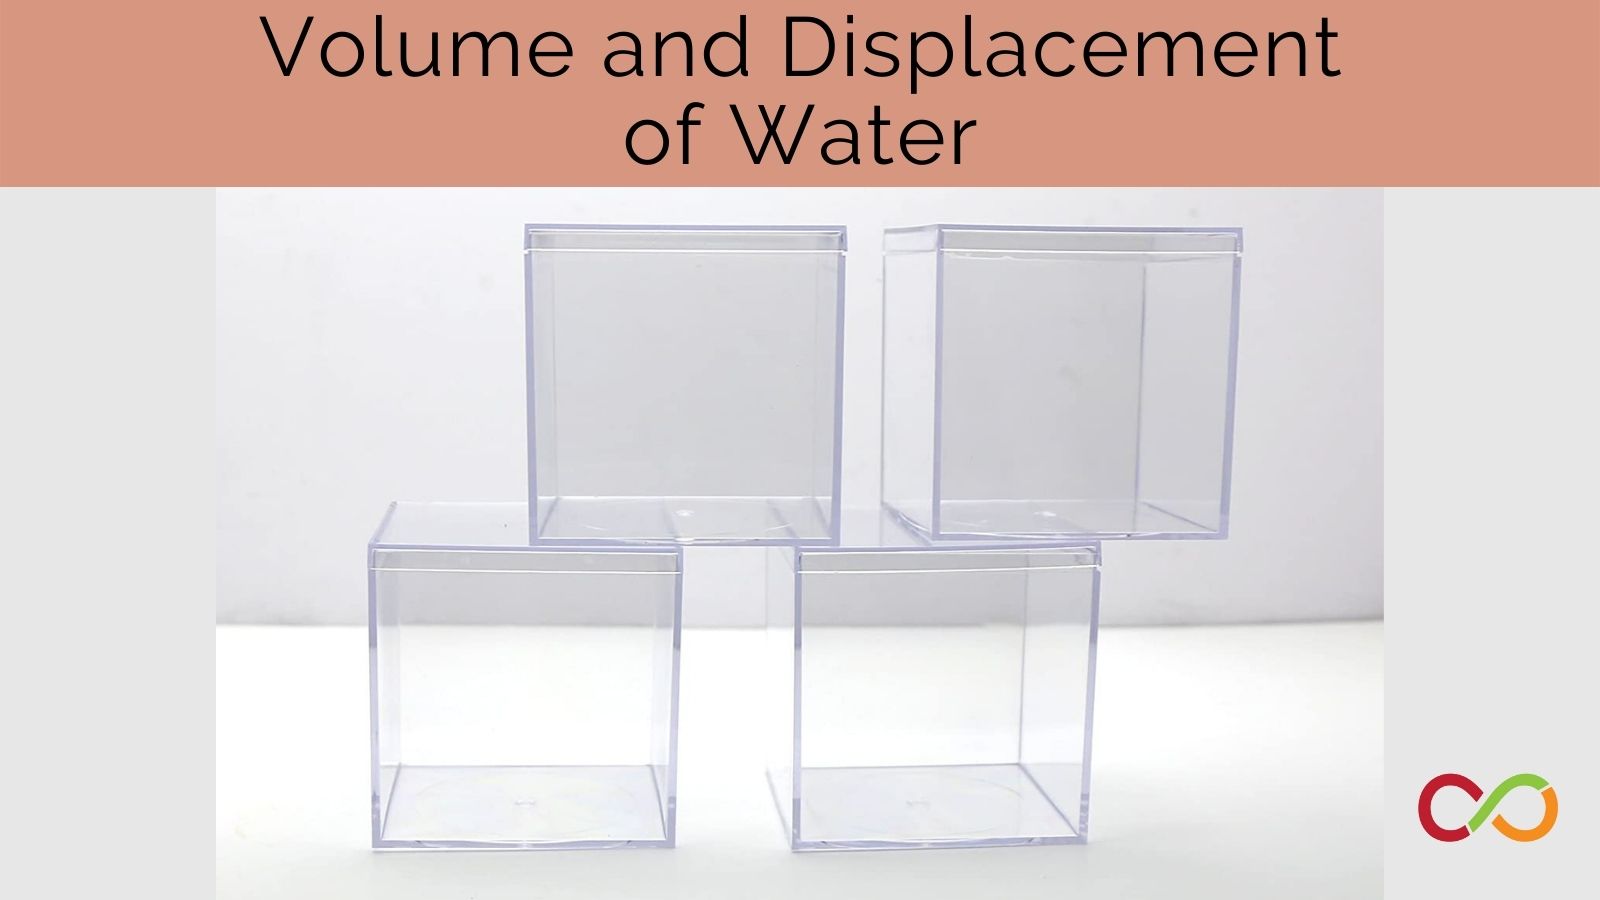 Feature image for the Volume and Displacement of Water activity